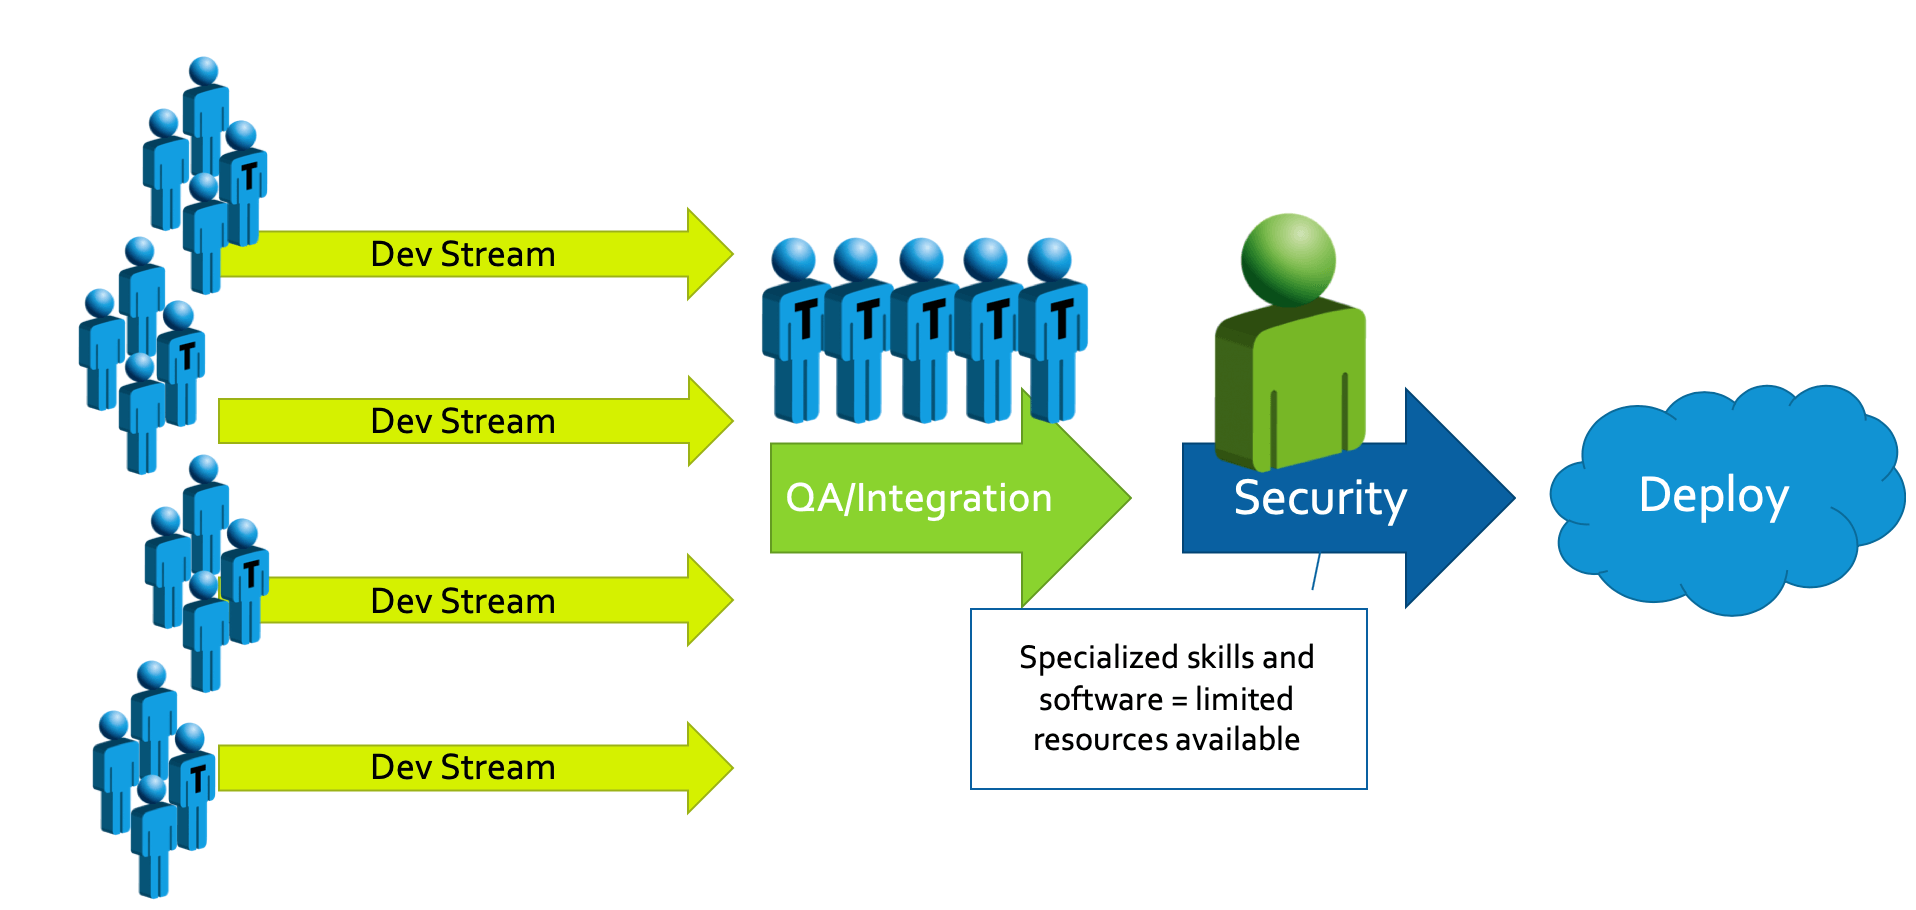 Workflow graphic showing how security integration tends to be seen as the last gating step for a release candidate, moving from development to QA to security and then deploy.